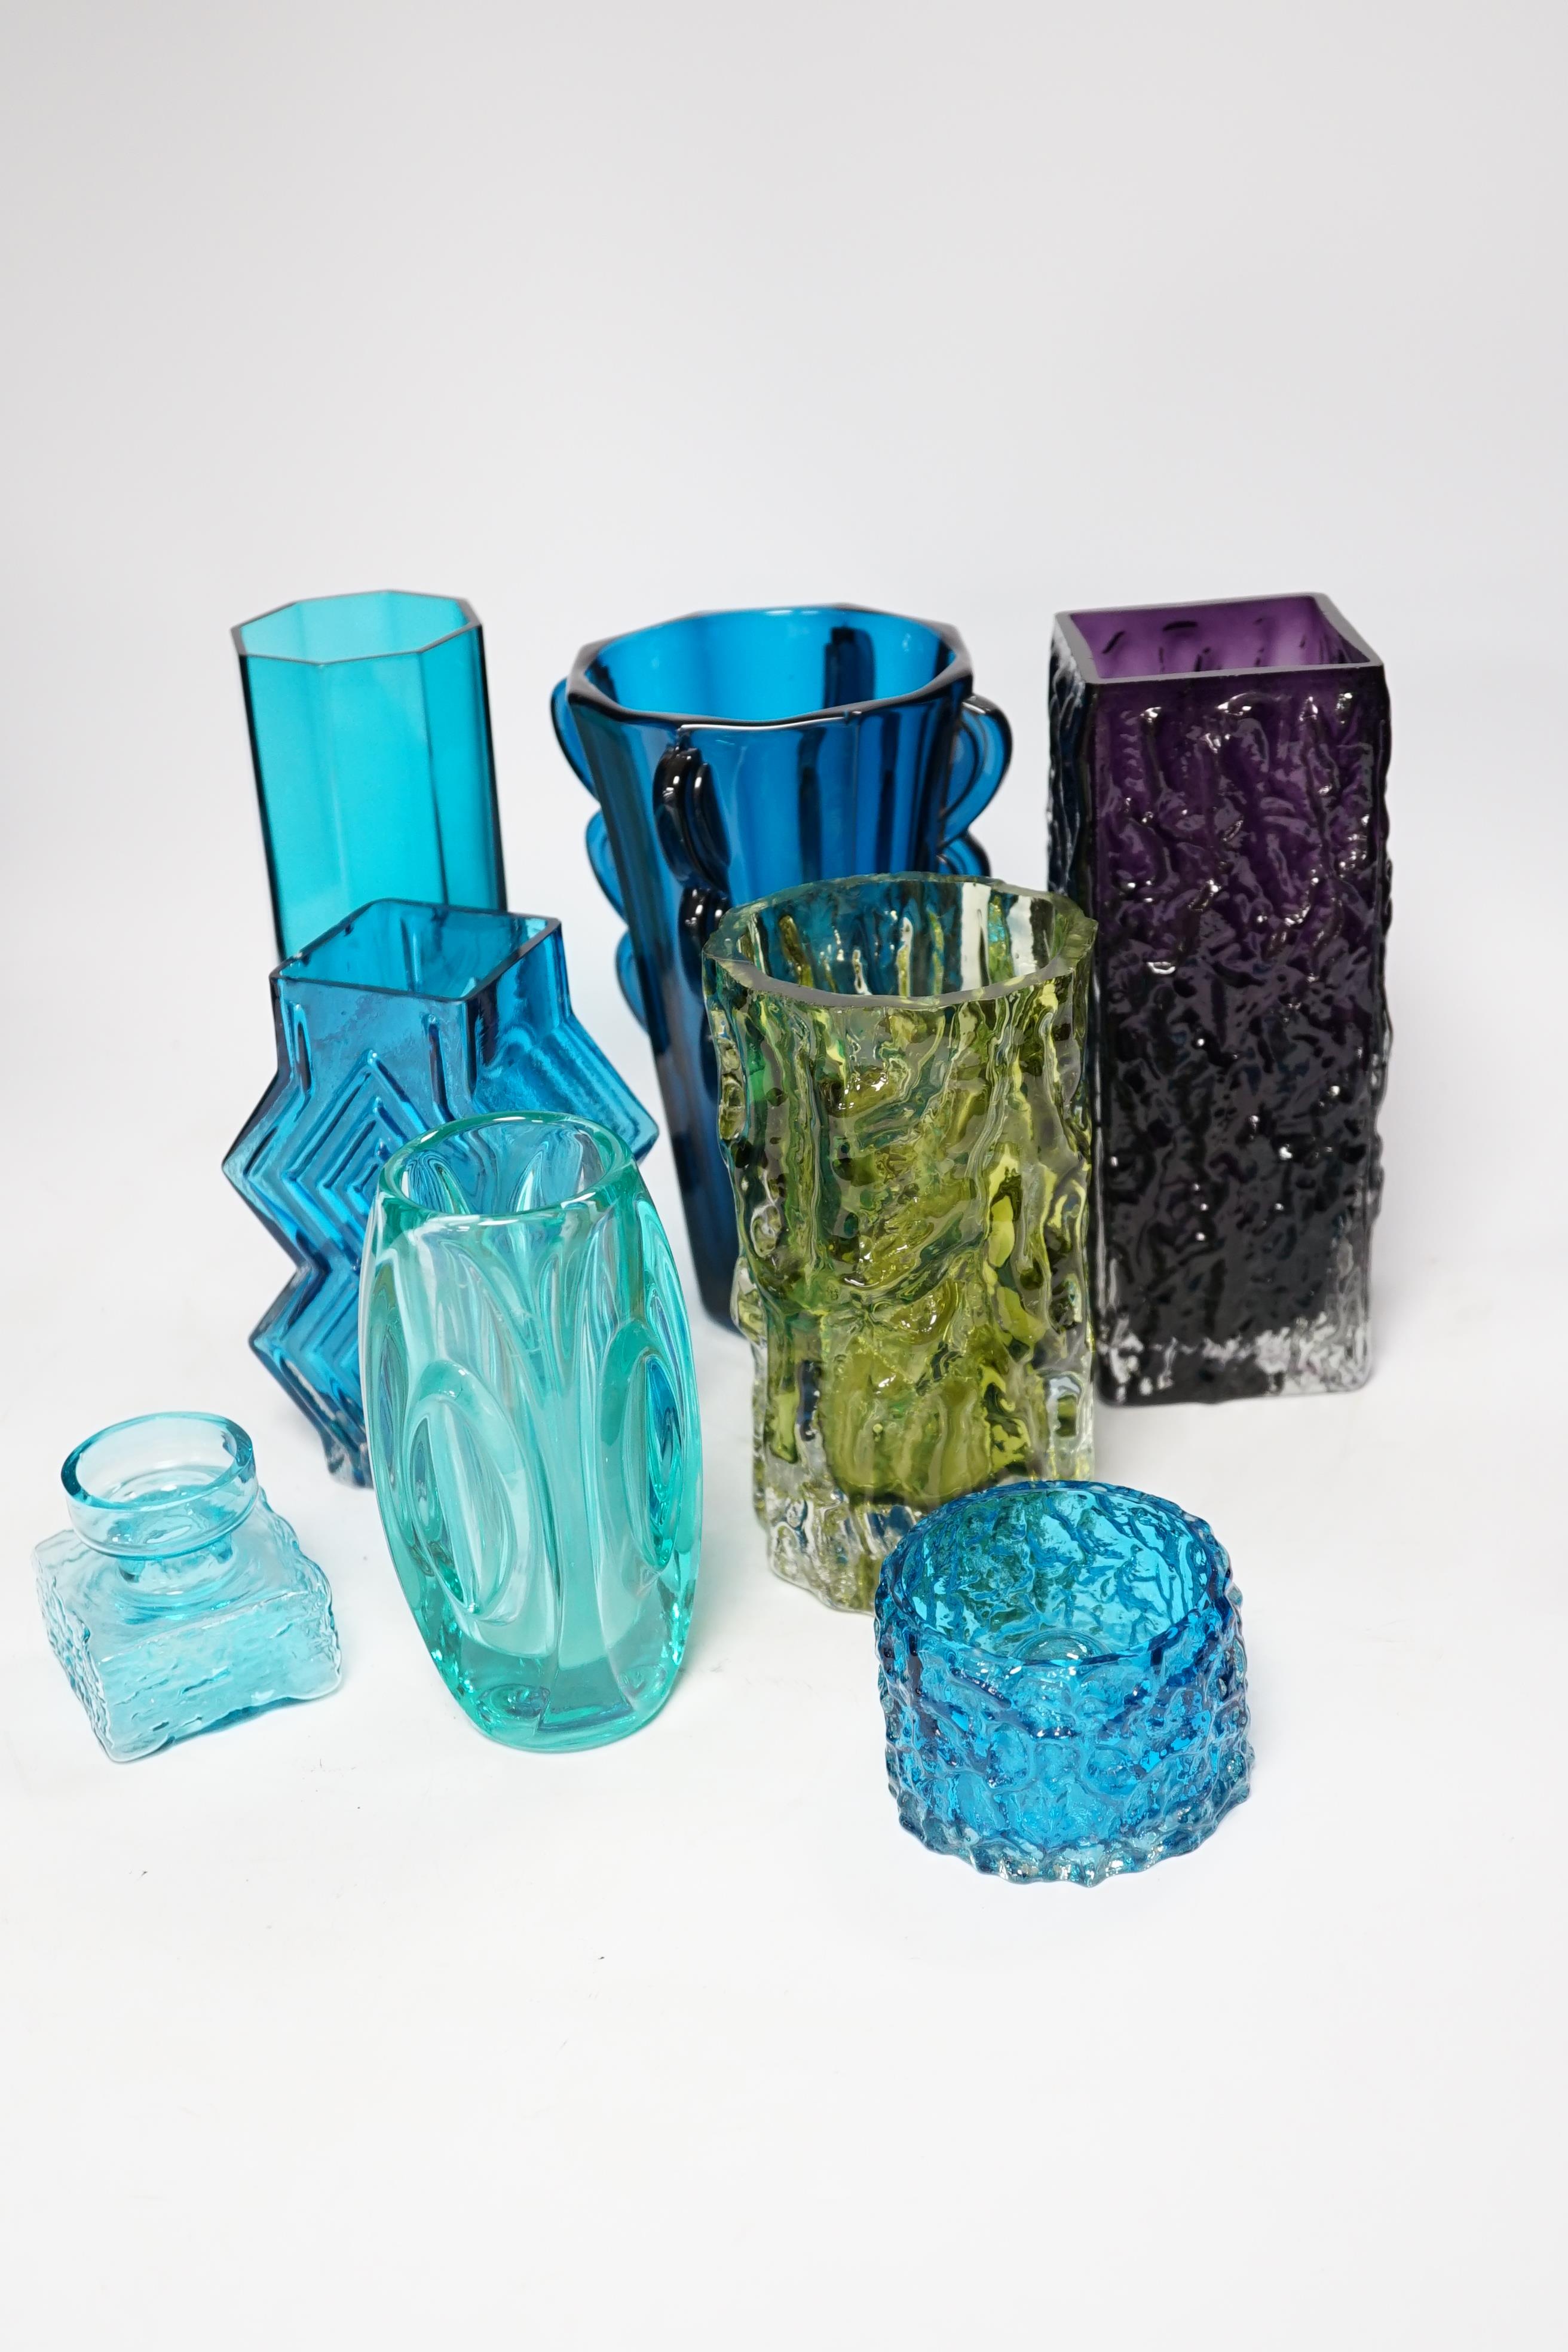 Eight coloured glass vases, including Whitefriars mobile phone vase in kingfisher blue, 22cm high